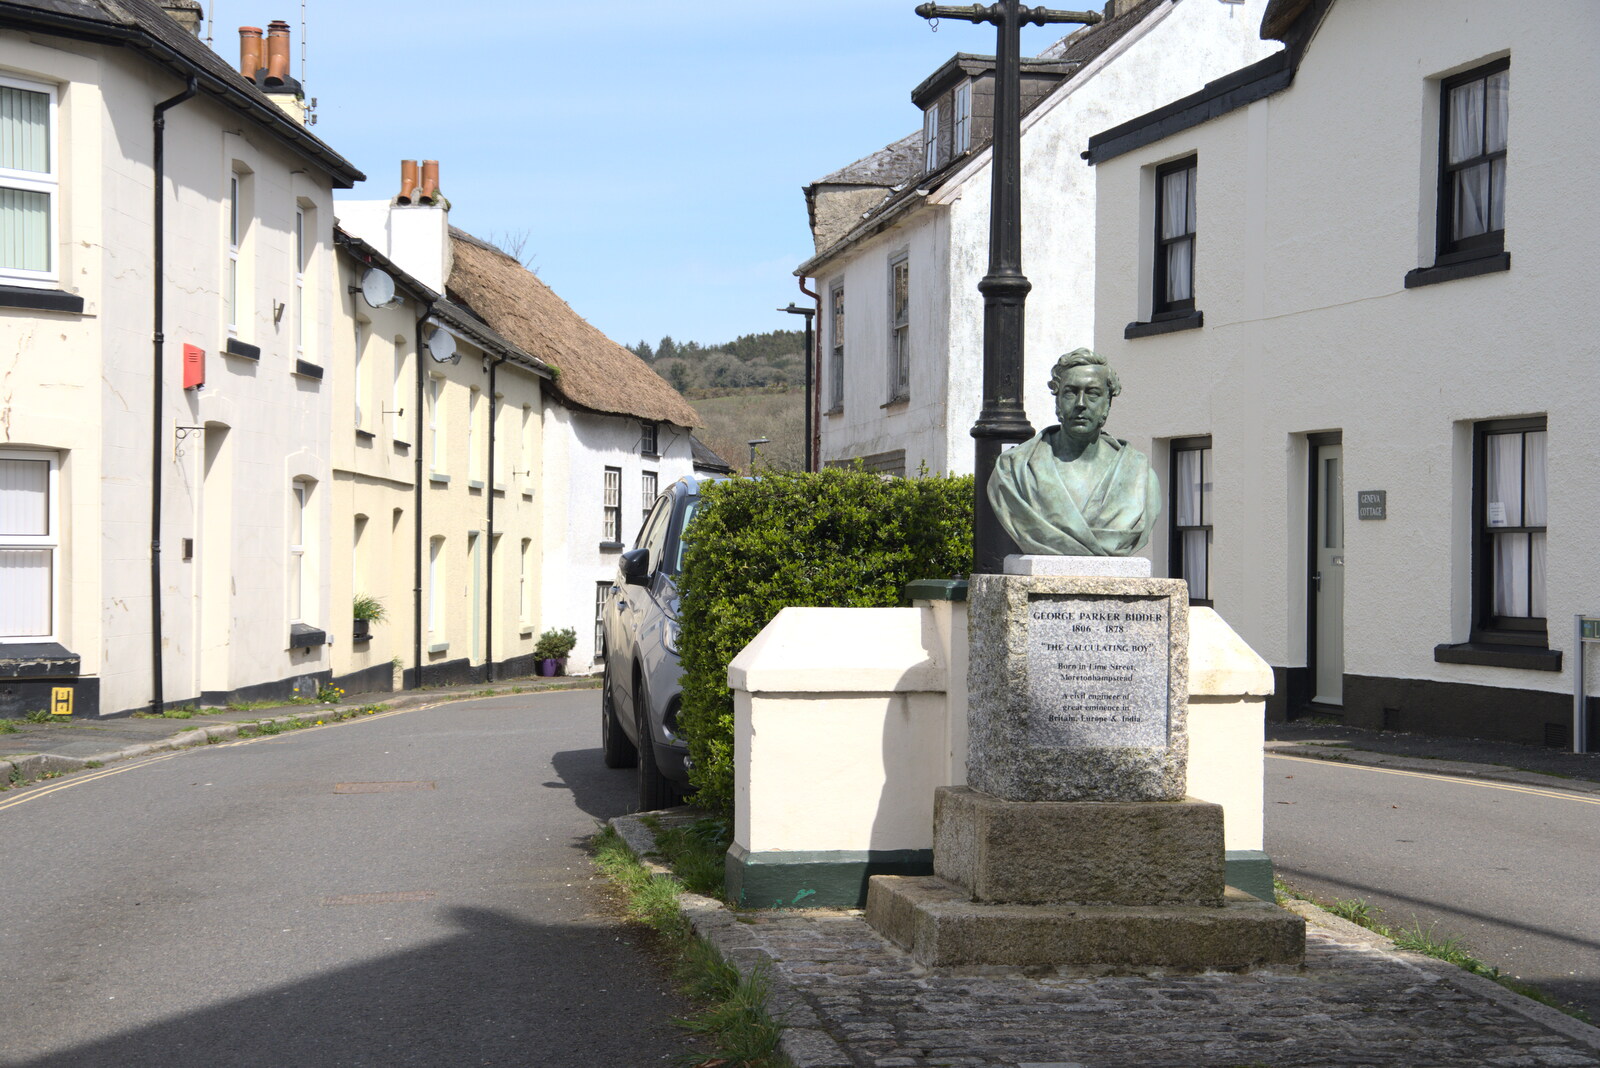 The status of George Parker Bidder on Lime Street from Easter in South Zeal and Moretonhampstead, Devon - 9th April